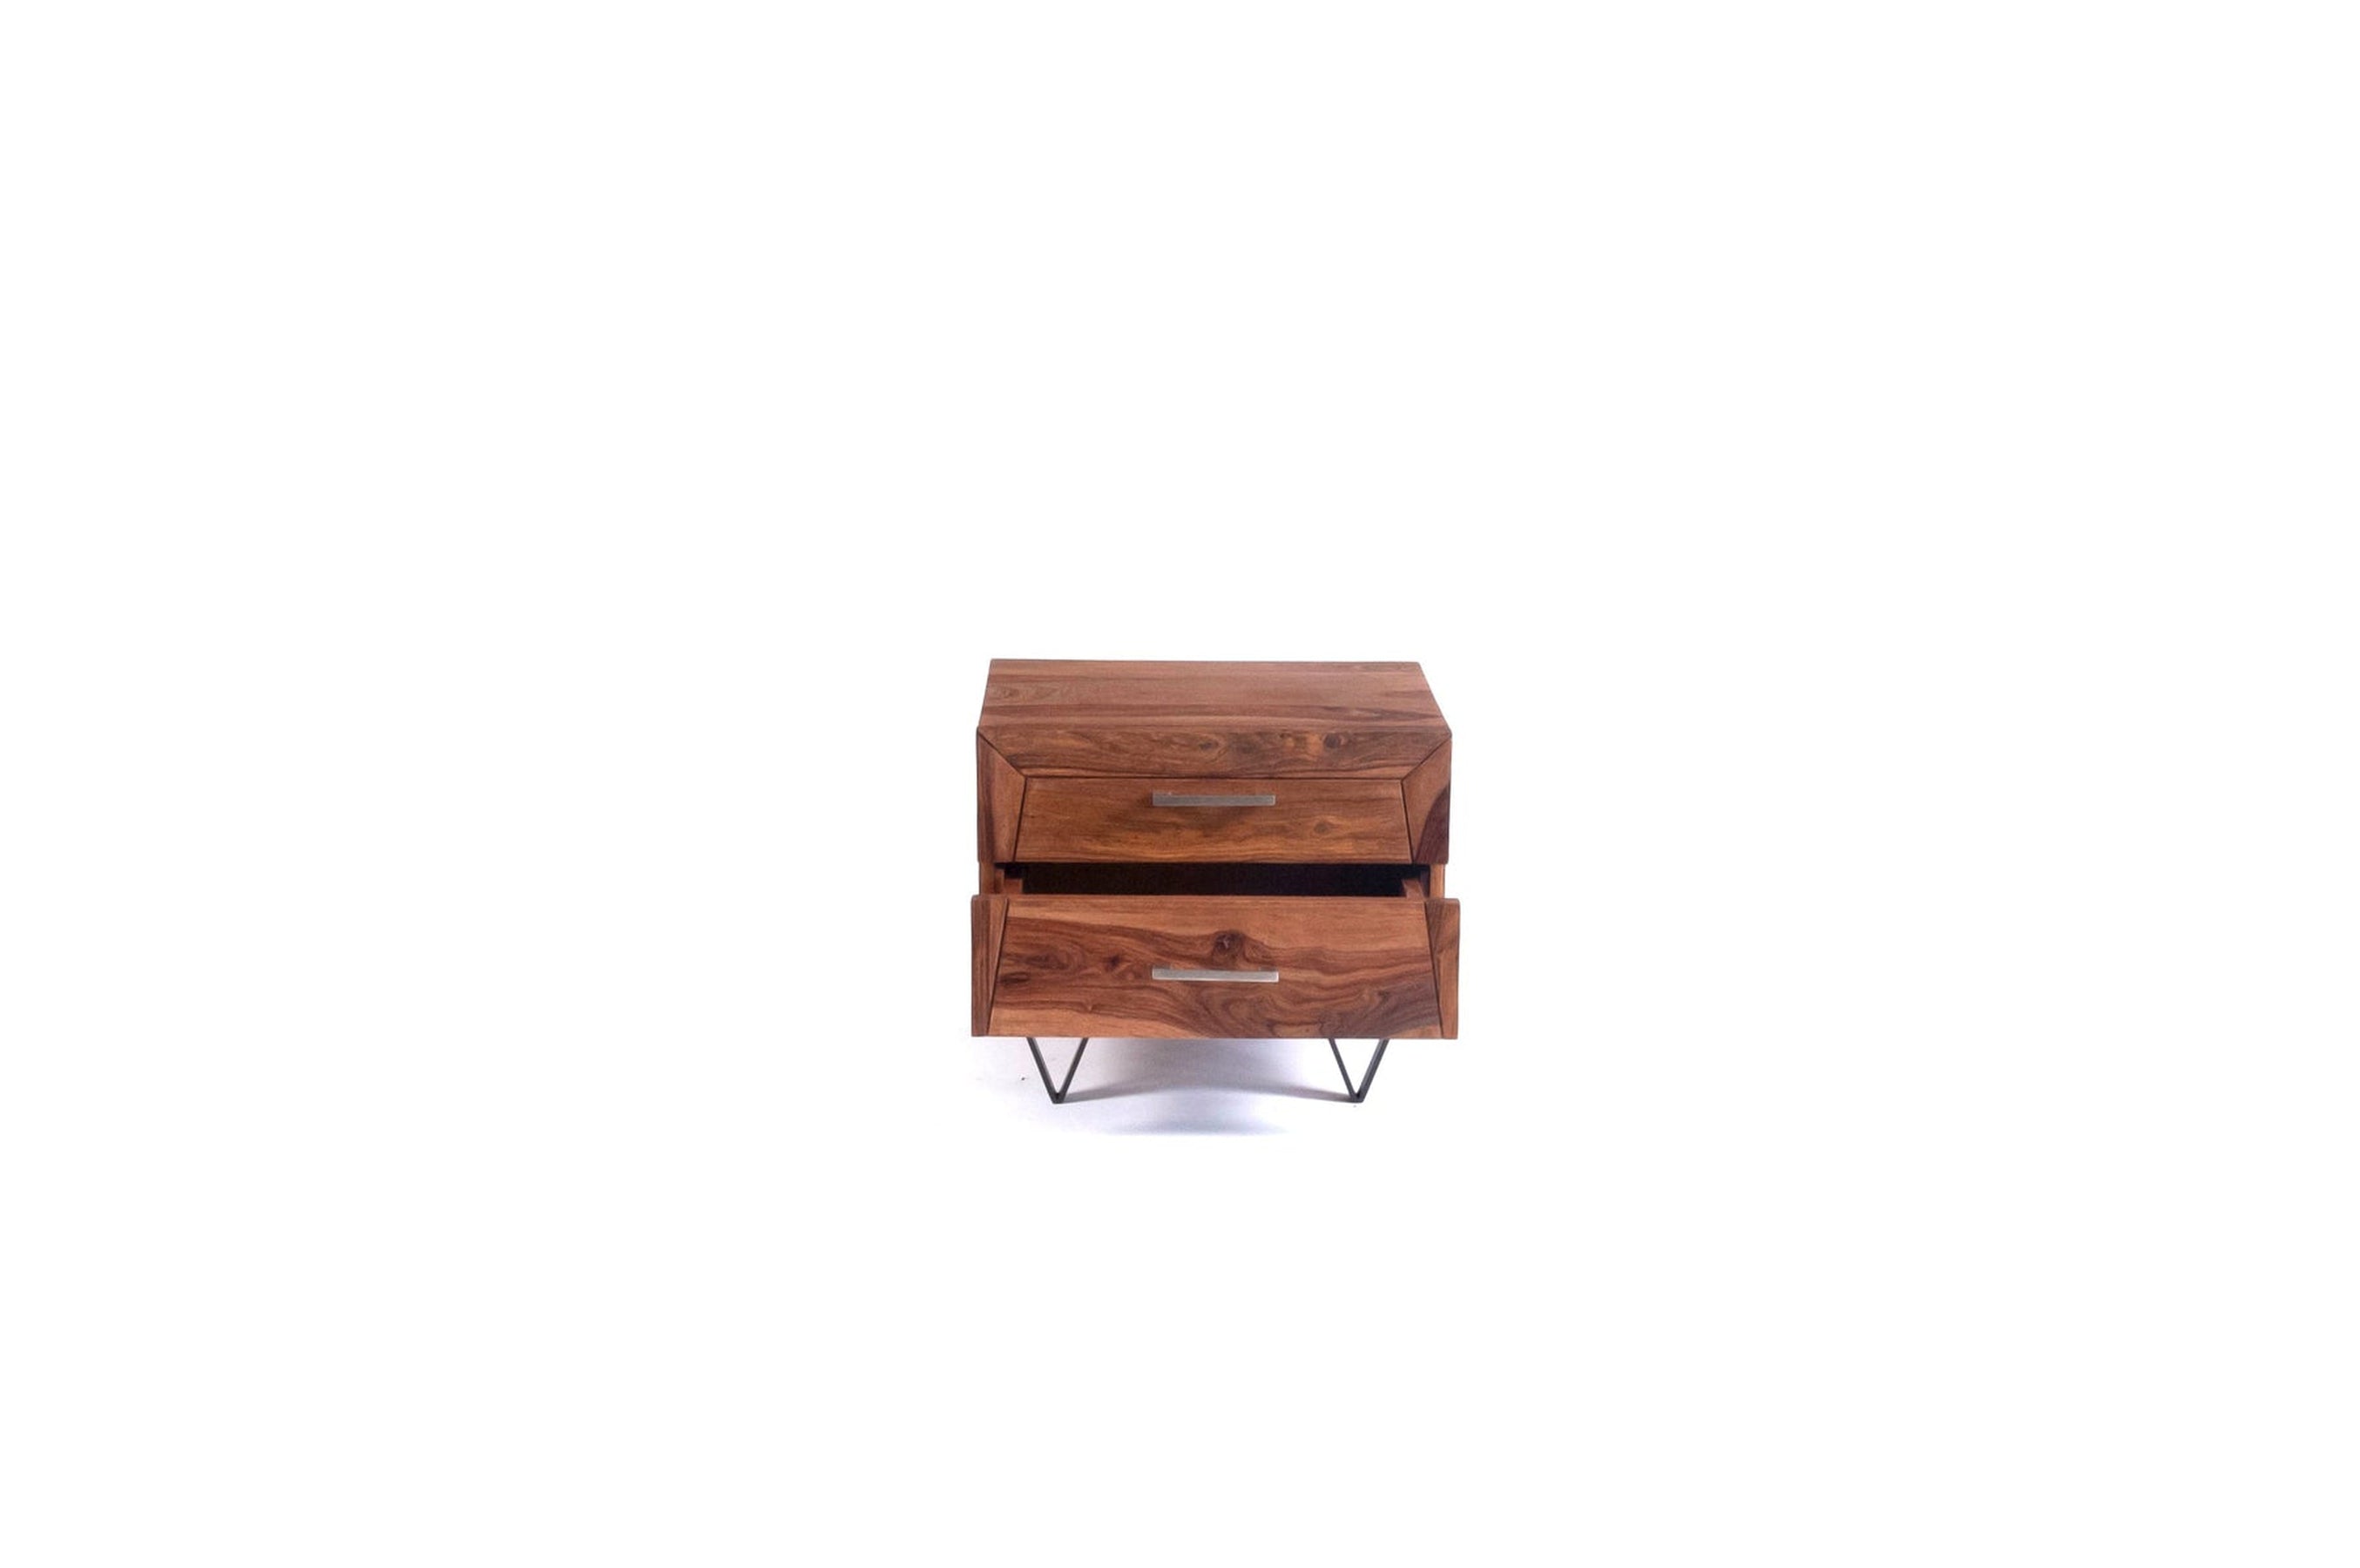 Bedside Table | Wooden Nightstand with 2 Drawers and Handles, Side End Table for Bedroom/Living Room | 48x40x40 cm